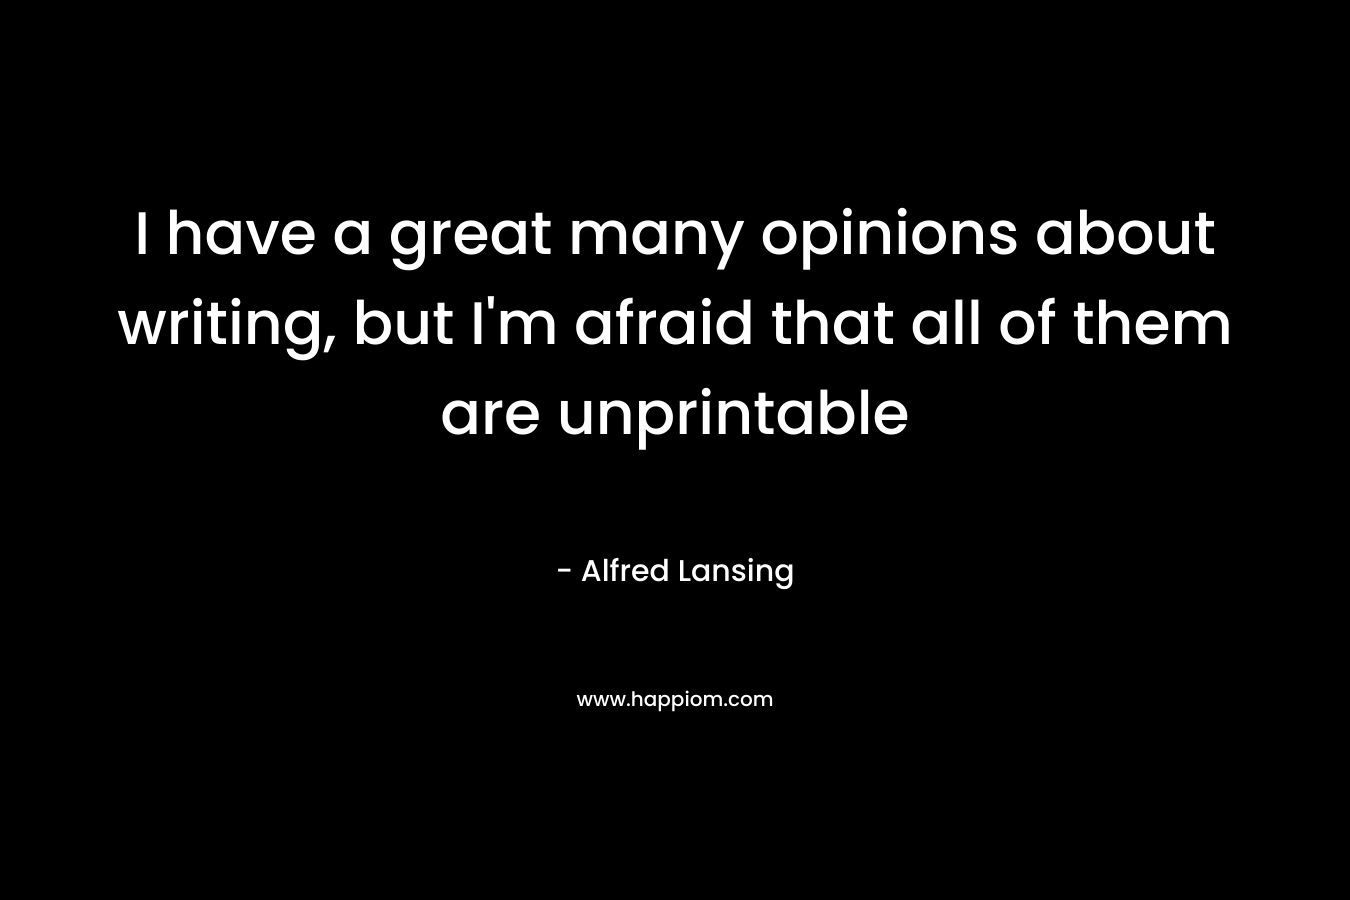 I have a great many opinions about writing, but I’m afraid that all of them are unprintable – Alfred Lansing